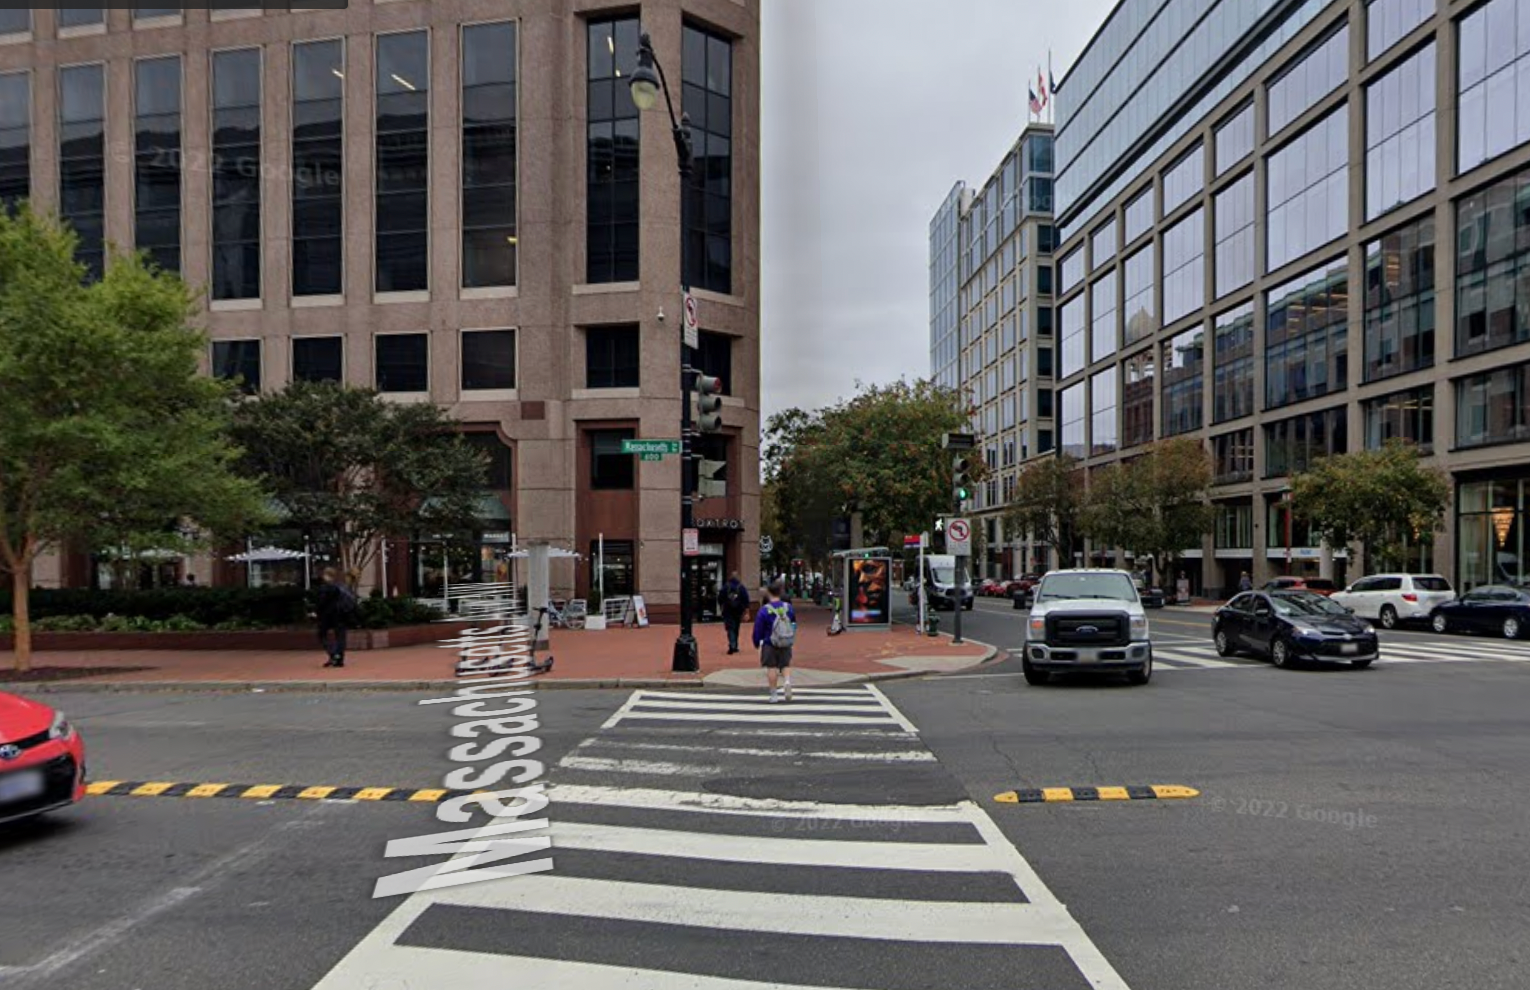 street view of 7th Street, K Street, and Massachusetts Avenue from google maps